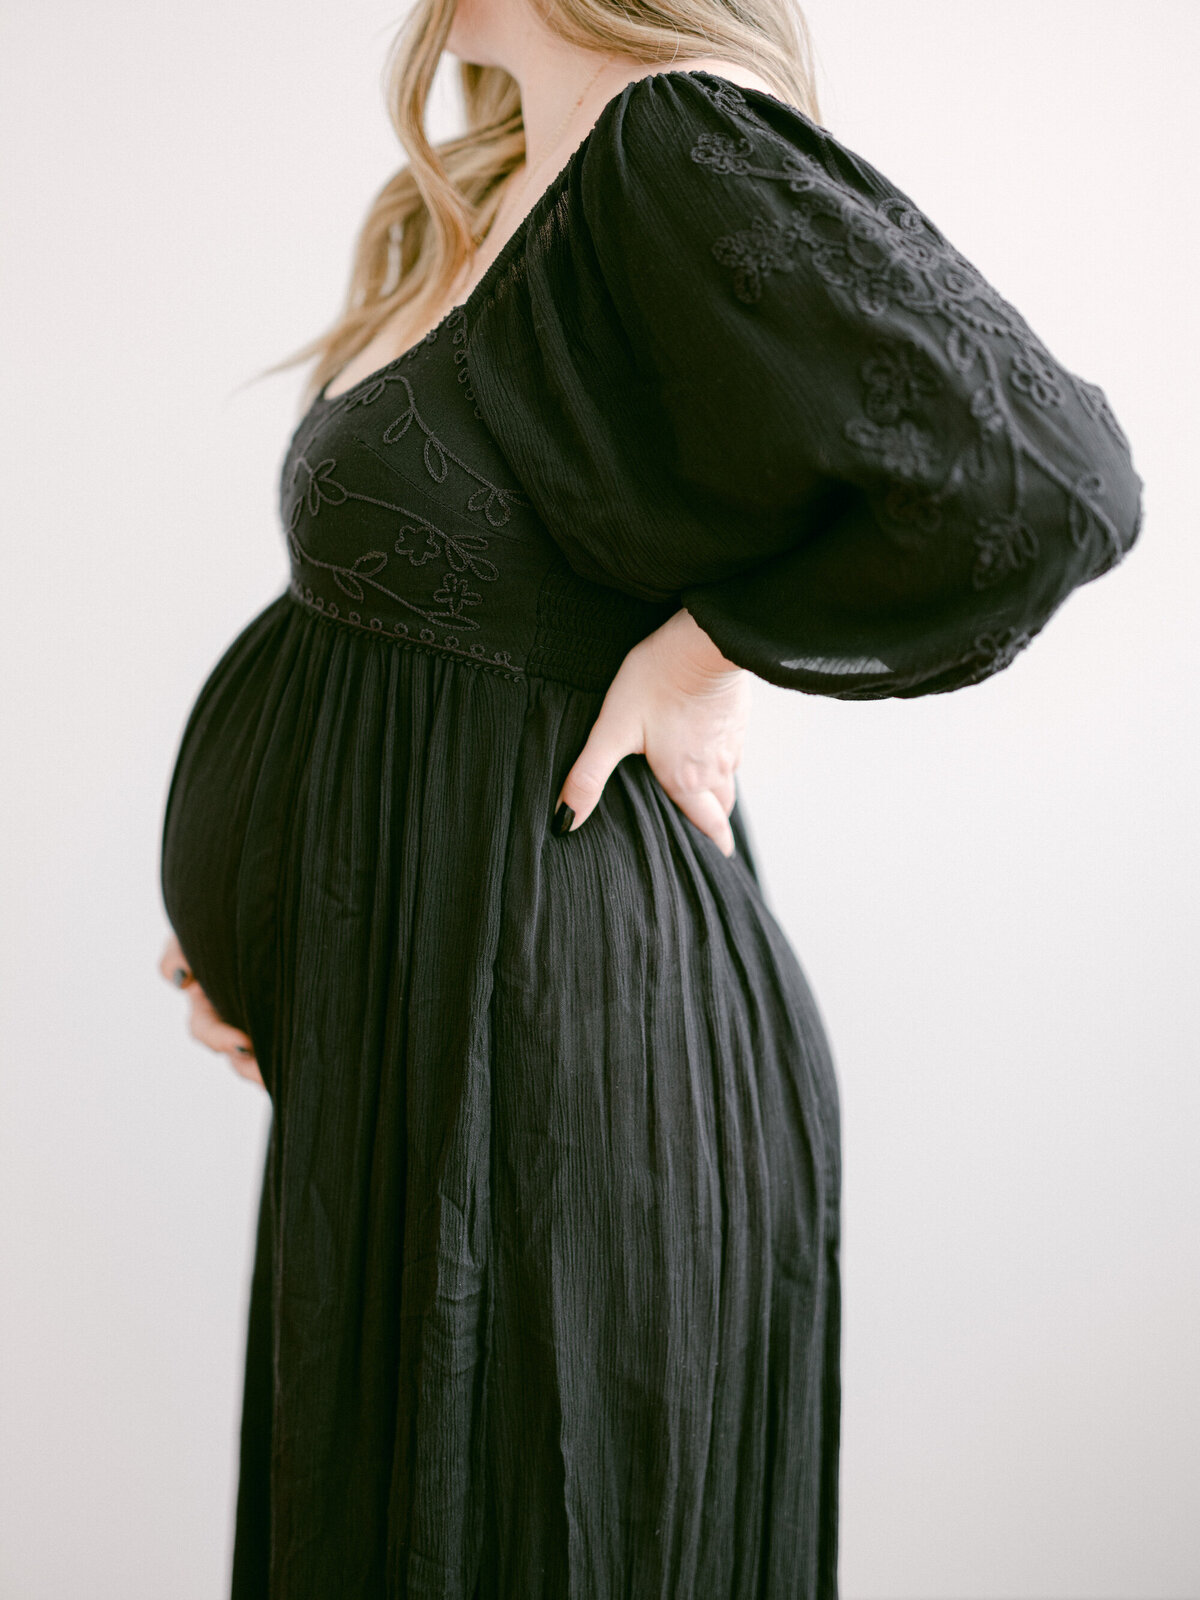 ct-maternity-session-photo-rental-studio-the-apiary-co-4